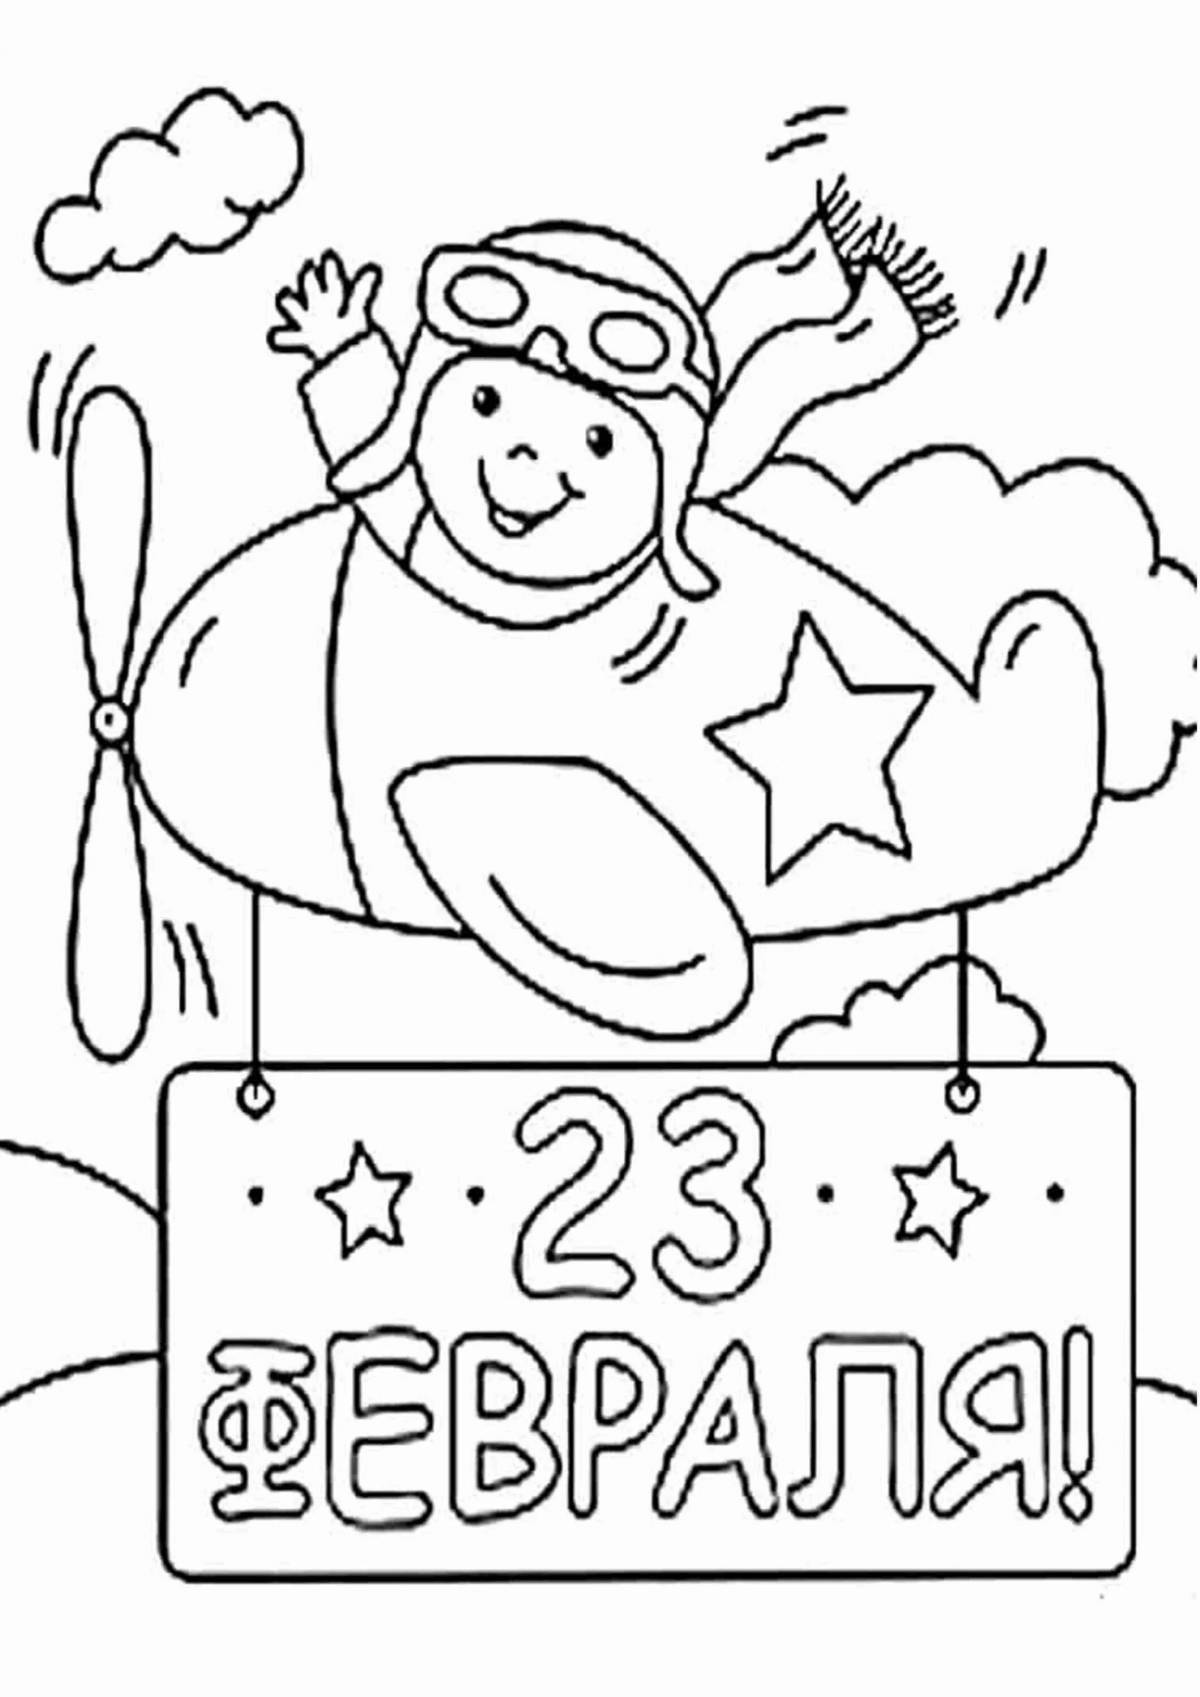 Adorable coloring book for 4 year olds, February 23